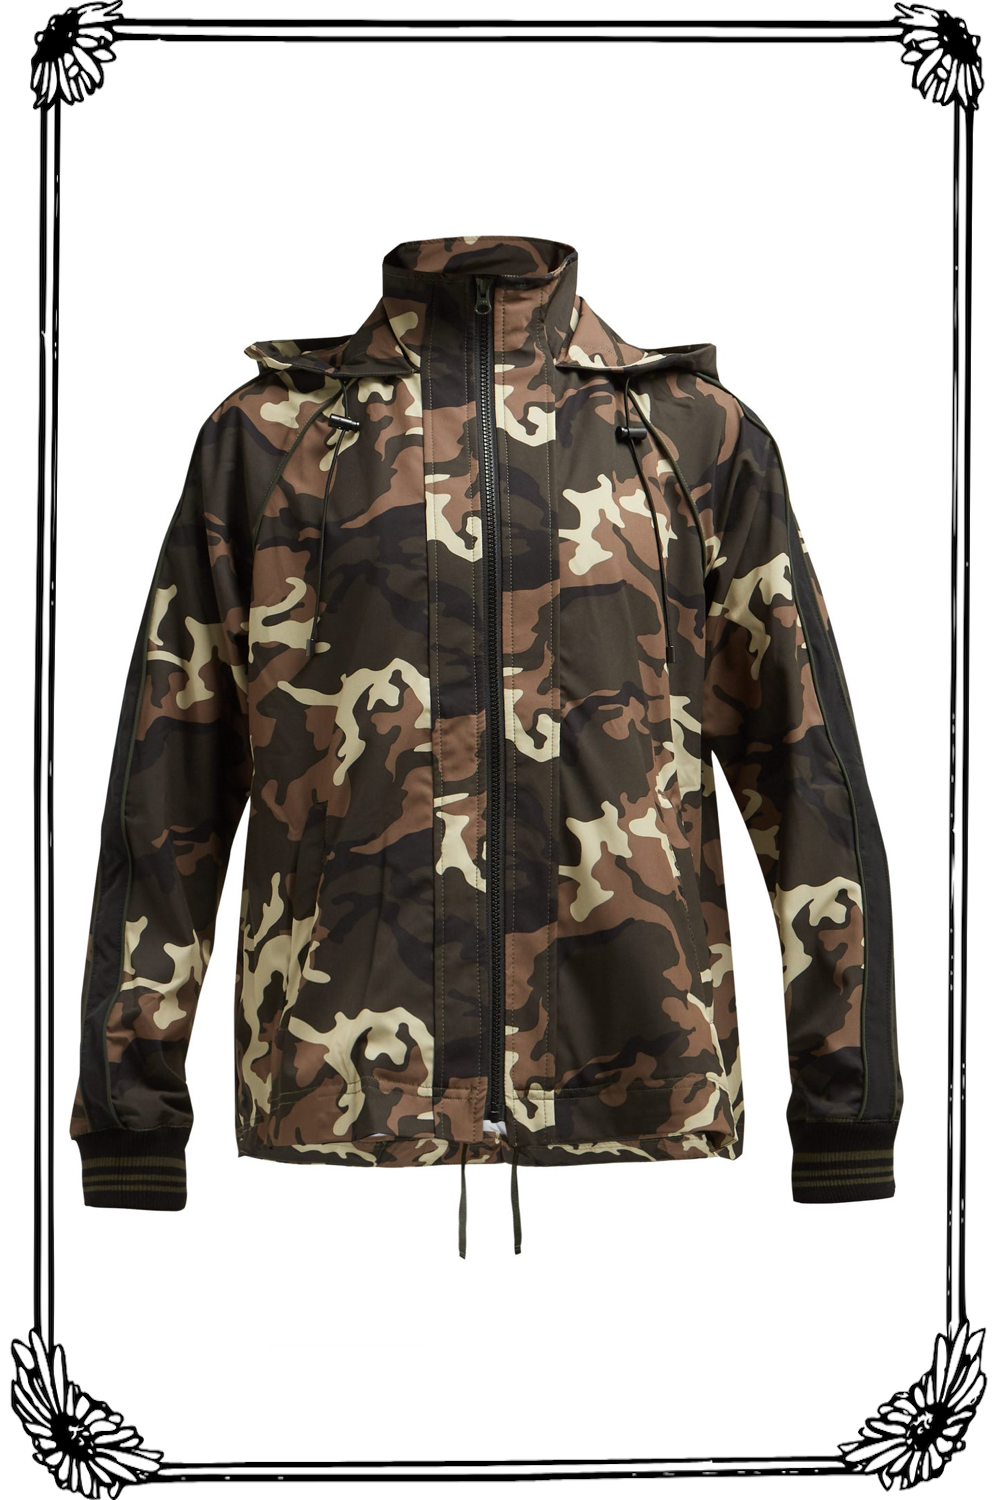   The Upside Ash Camouflage-Print Hooded Jacket  ($95, on sale from $190) 